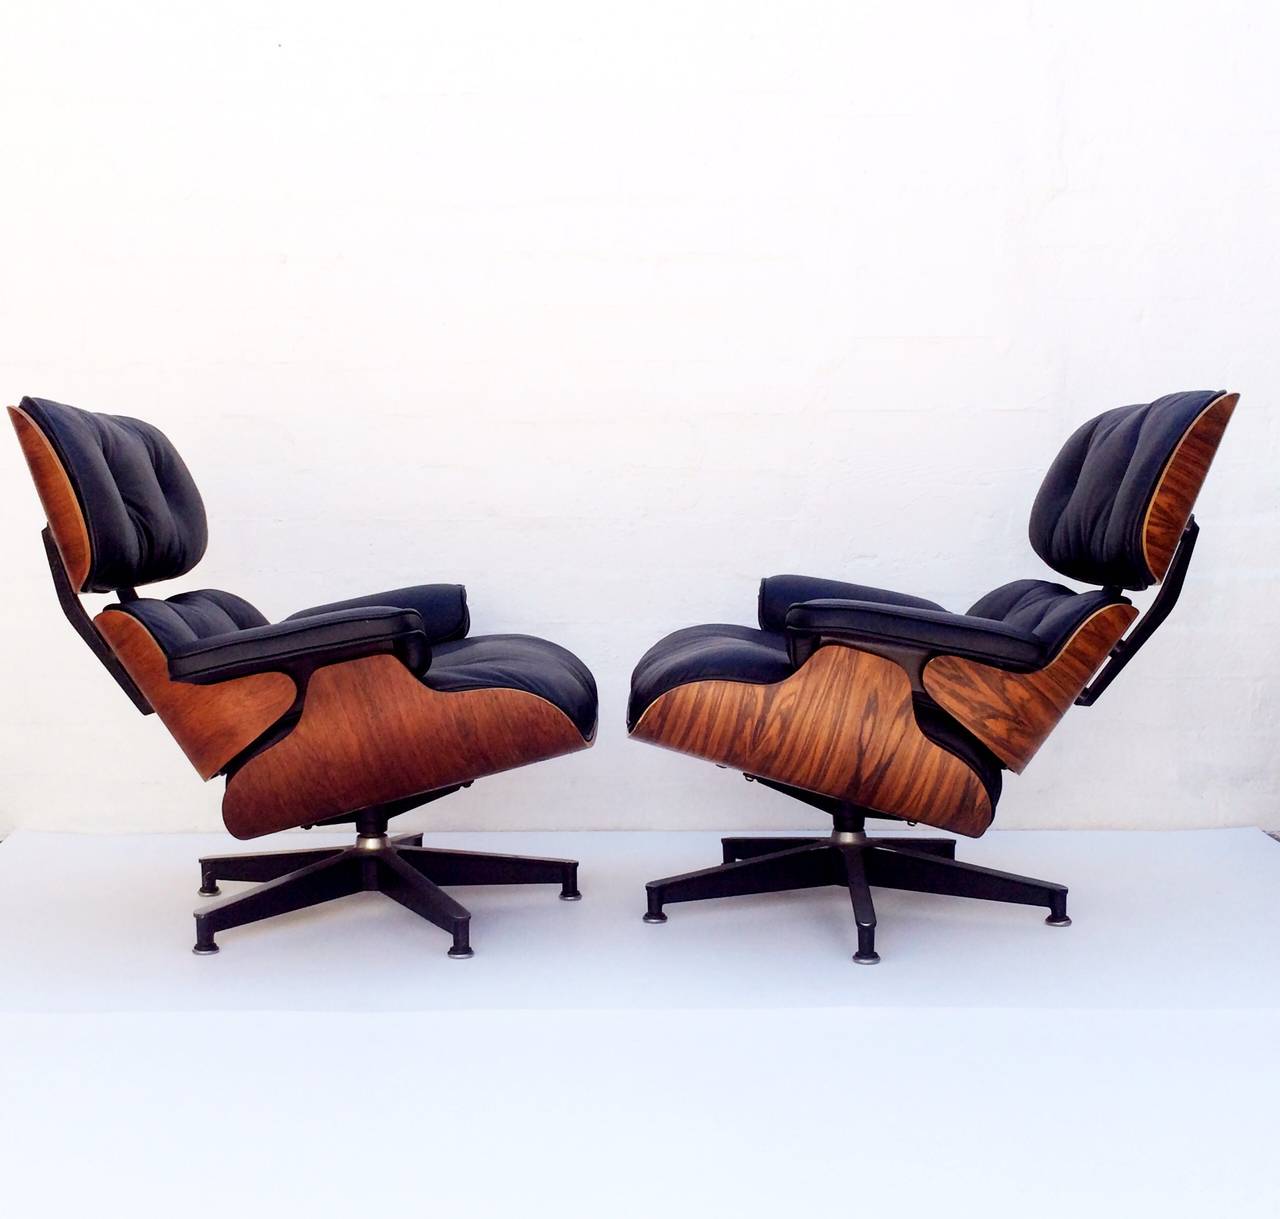 A pair of Eames 670 and 671 rosewood lounge chairs each with matching ottoman.
Down filled with newly reupholstered soft black leather.
These early edition, circa 1950s chairs and ottomans are in amazingly great condition.
Both chairs retain the